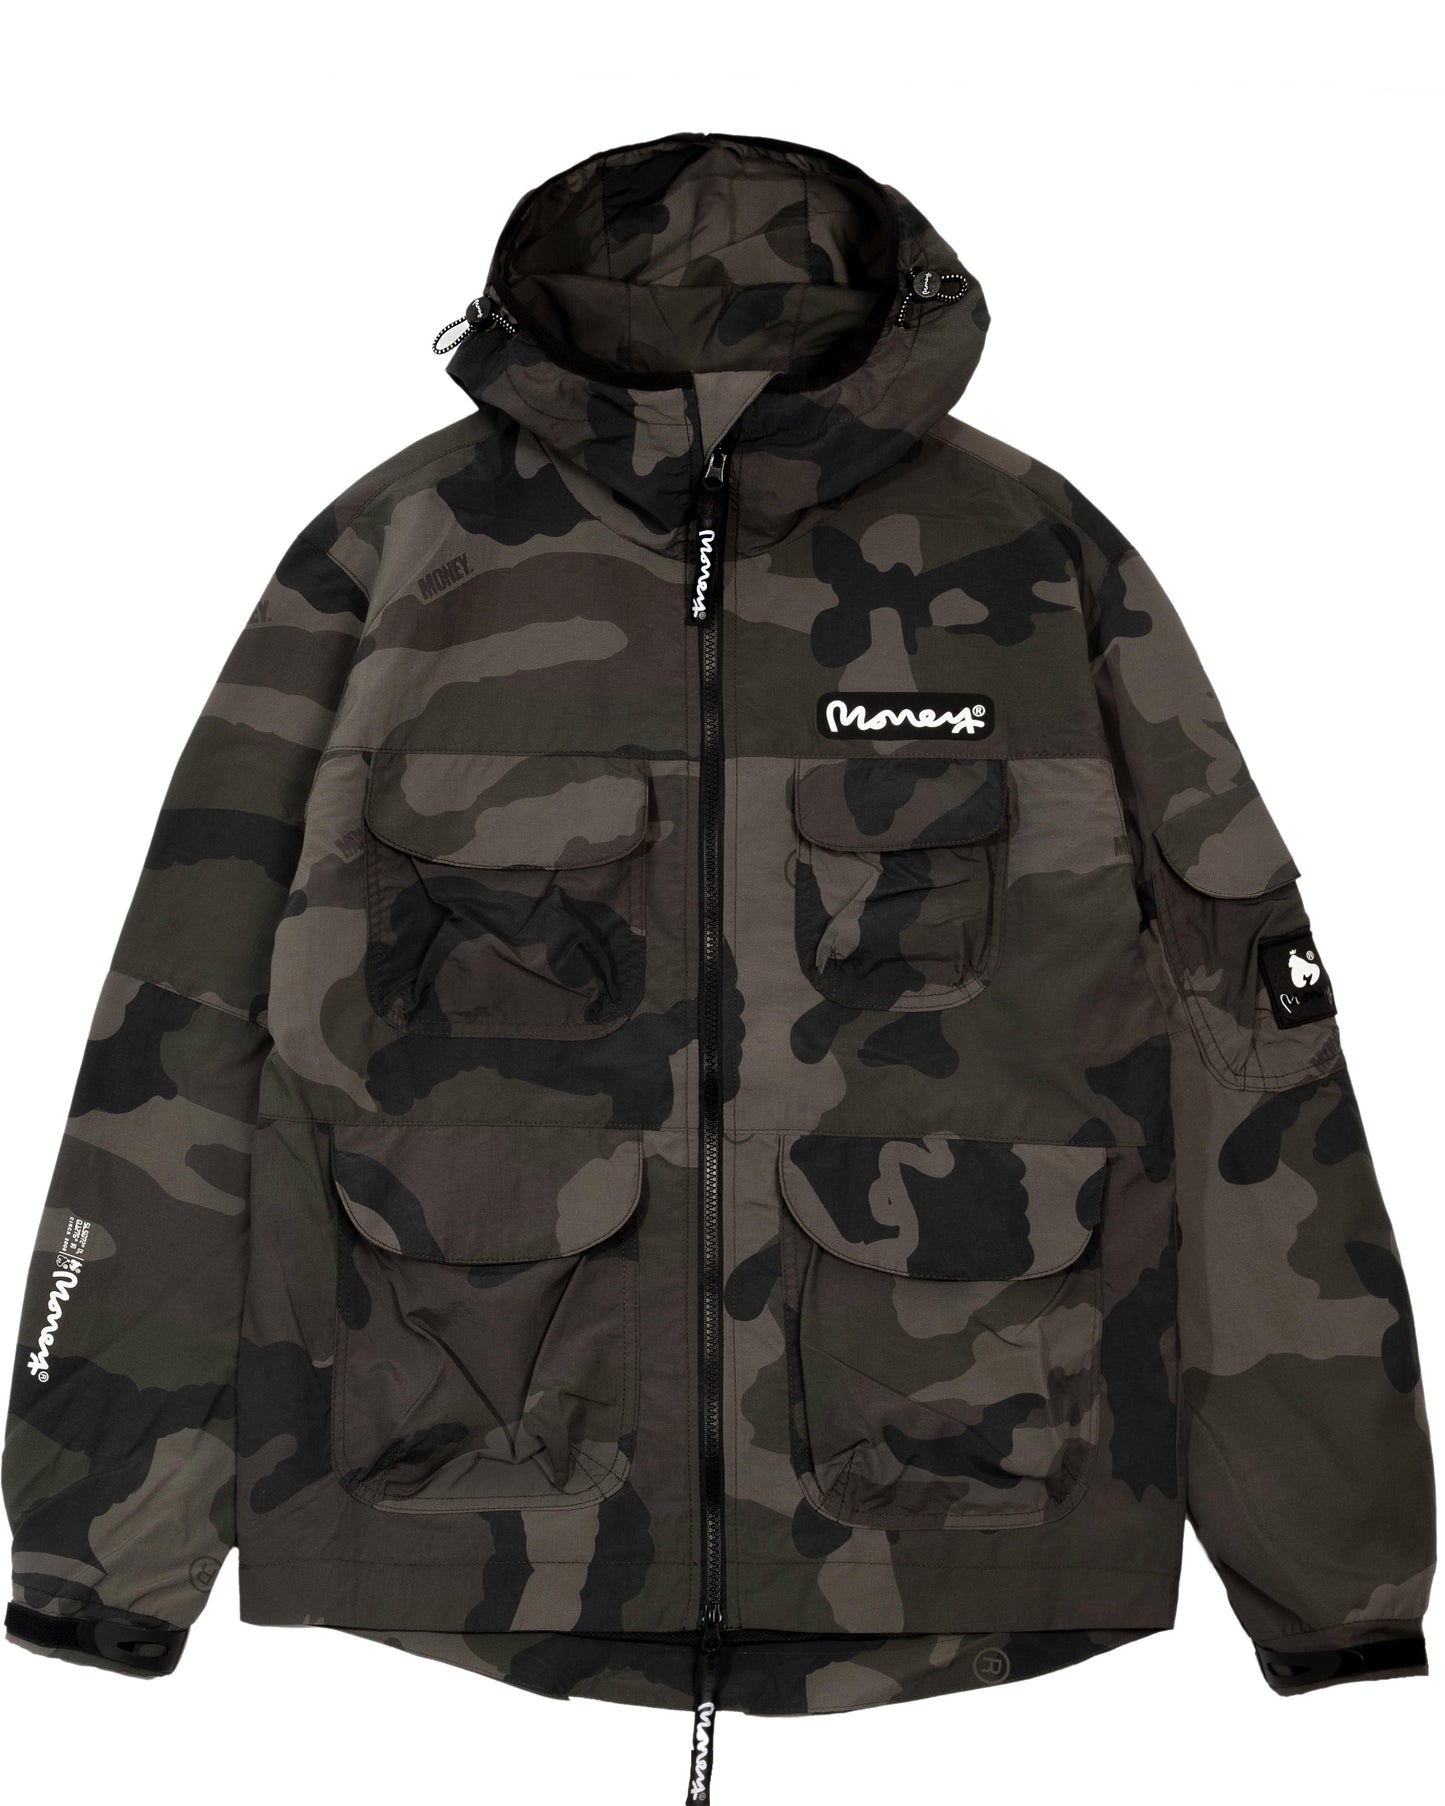 G SIG MOUNTAIN JACKET - FOREST CAMO